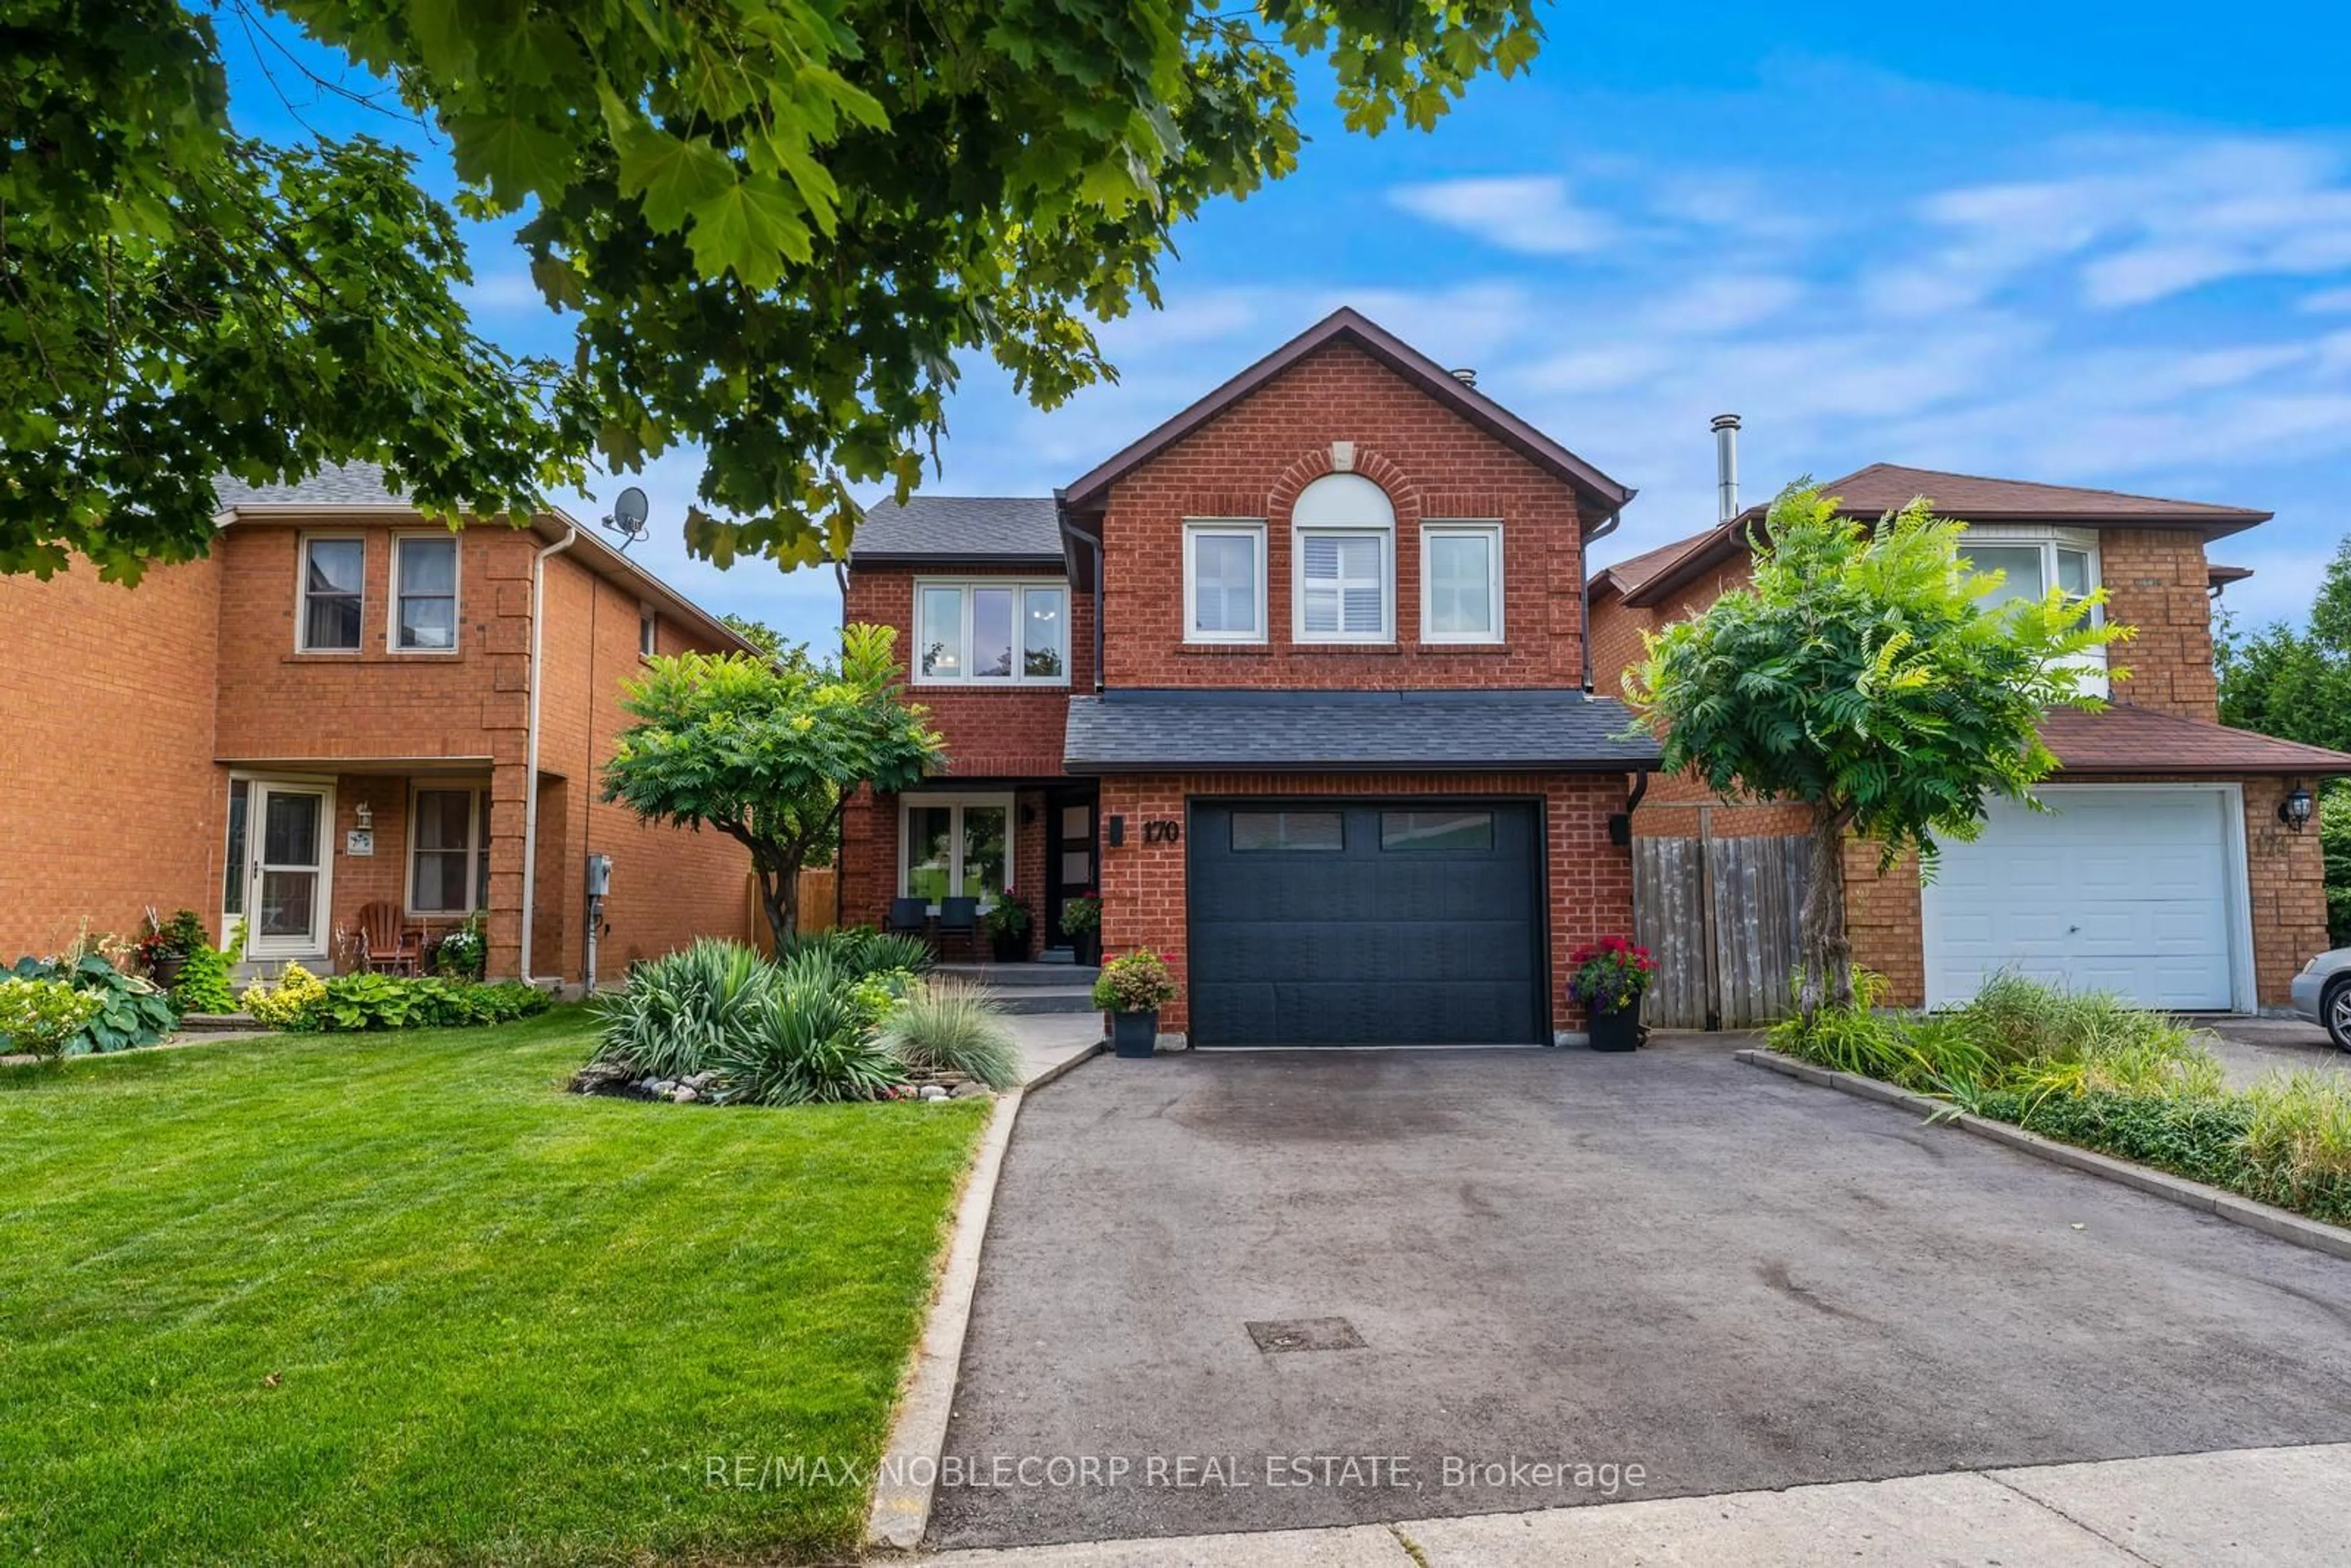 Home with brick exterior material for 170 Marlott Rd, Vaughan Ontario L6A 1H2